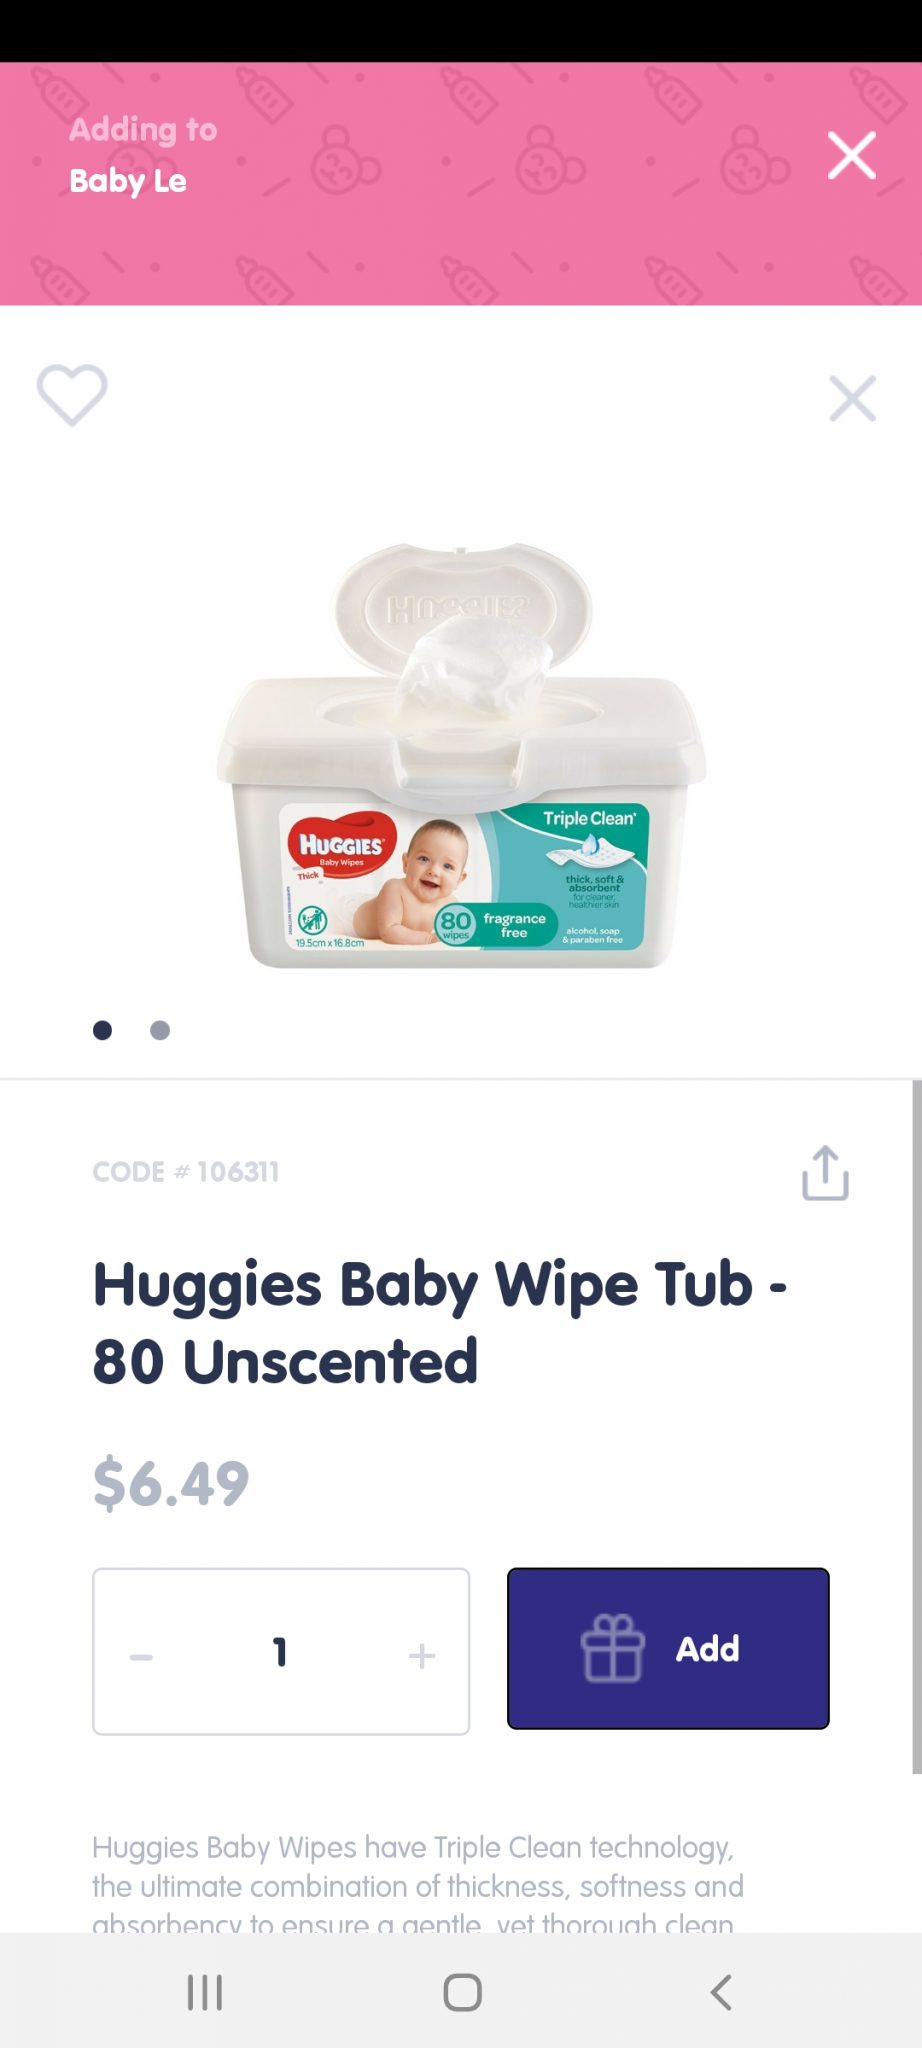 Huggies baby wipe tub - unscented